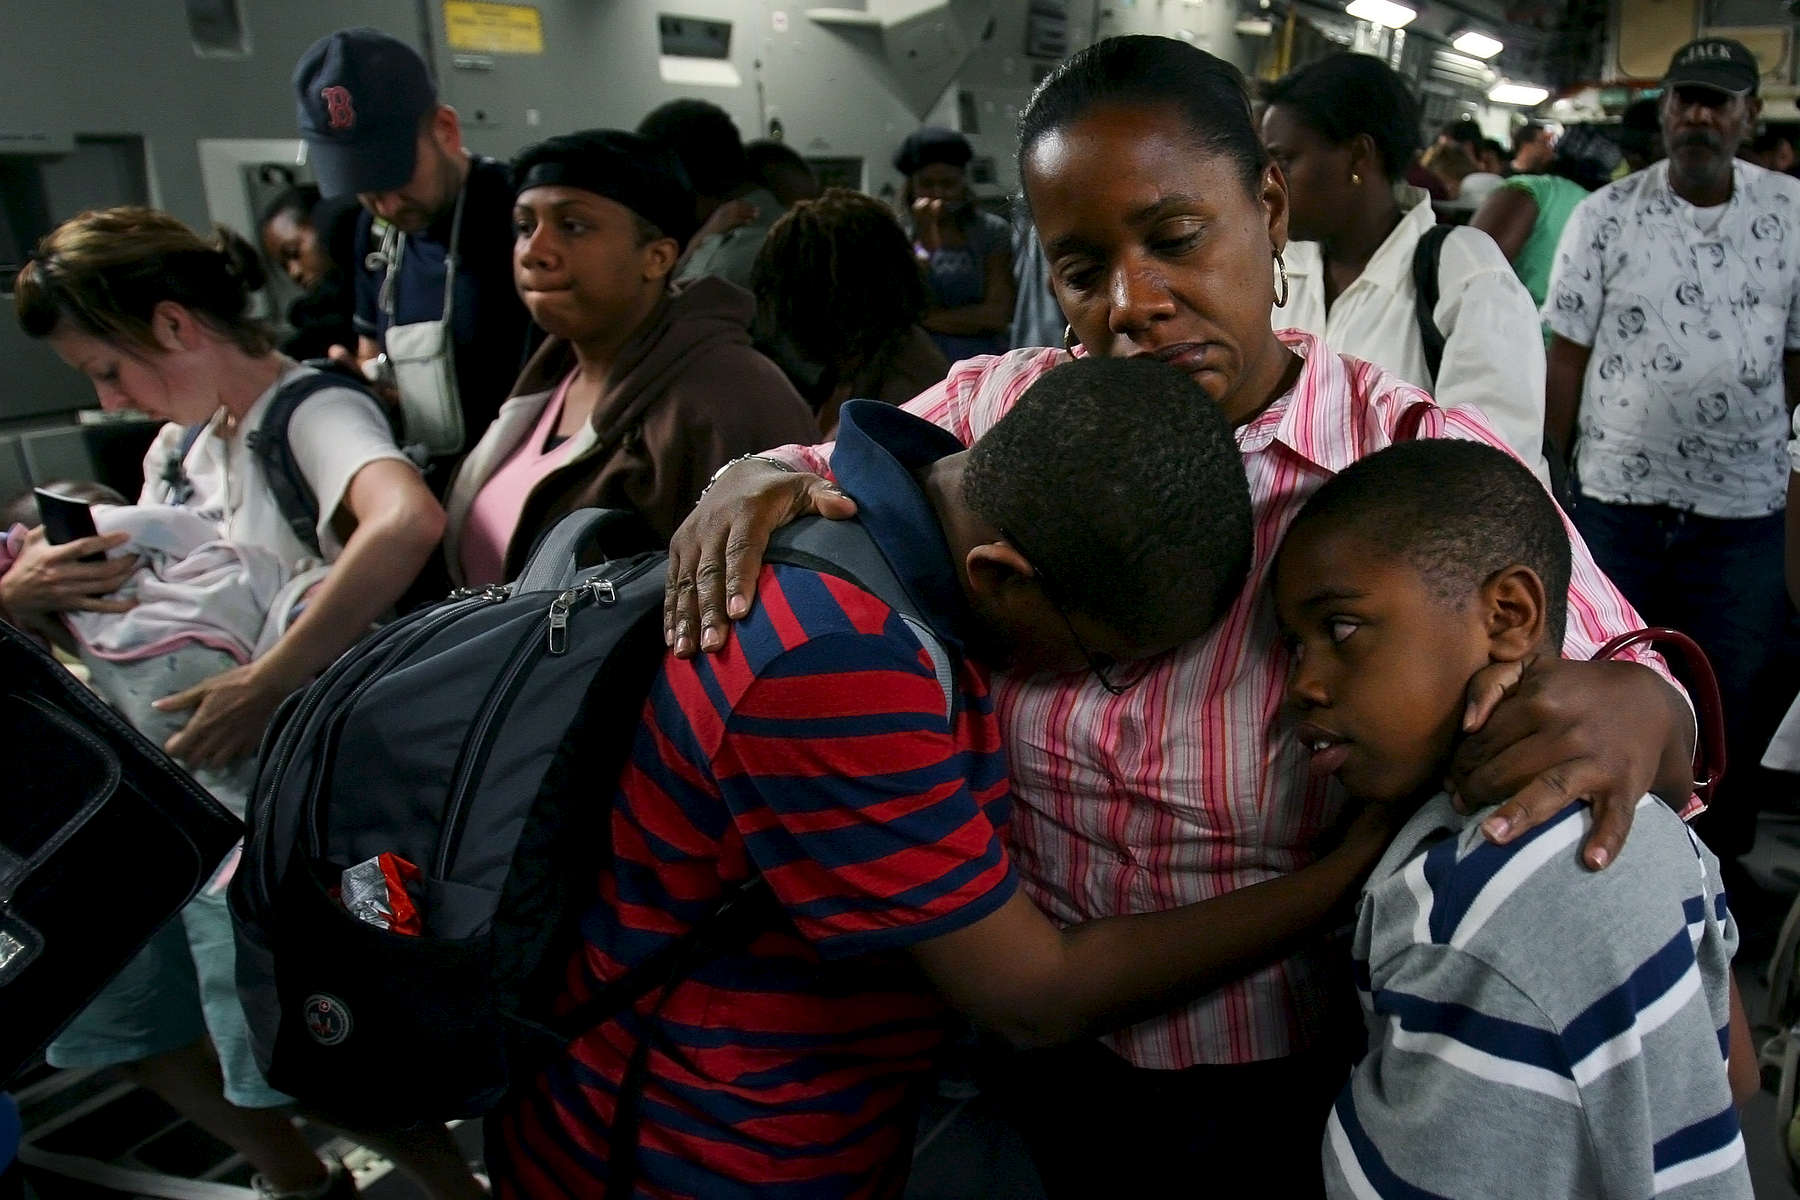 Daphnee Toban hugs her children Olivier Carl, left, and Sebastian Charles in the cargo bay of a March Air Reserve Base C-17 aircraft after arriving at Orlando Sanford International Airport in Fla. Daphnee's children were visiting their grandmother in Haiti when the earthquake hit. (The Press-Enterprise/ Mark Zaleski)